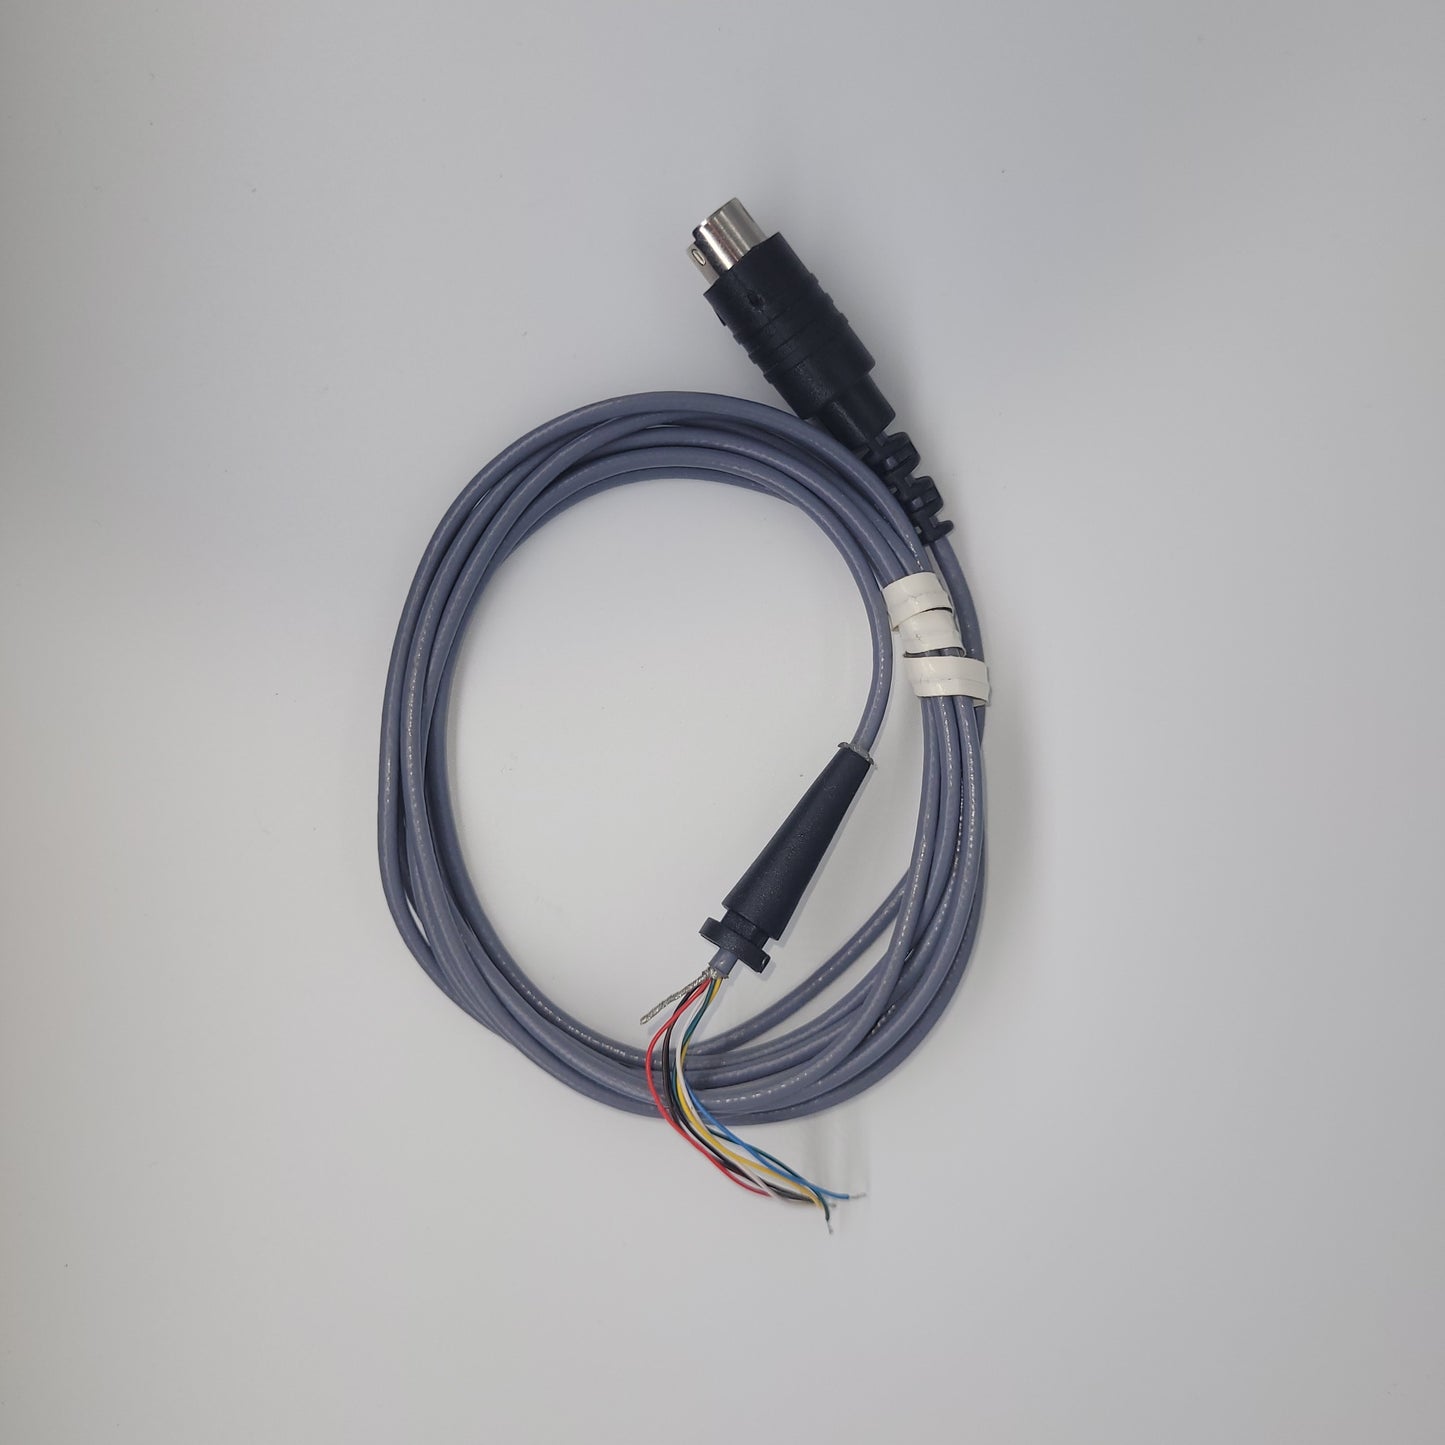 AC0182 Straight Cable for VersaLab Probes